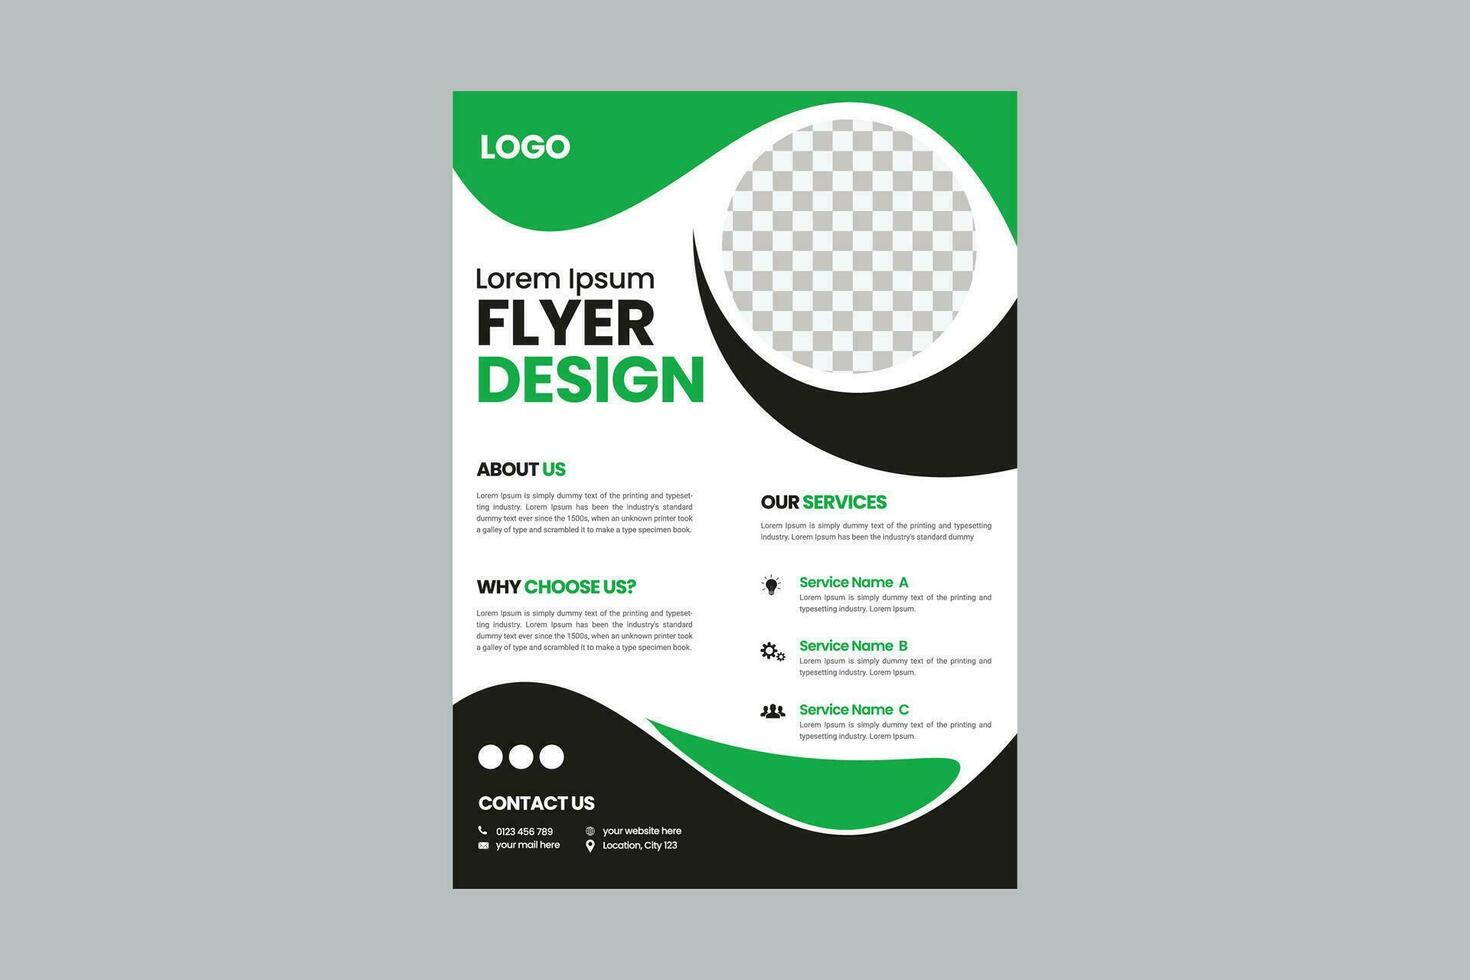 Corporate business, digital marketing agency flyer Brochure design, cover modern layout, annual report, poster, flyer in A4 template vector